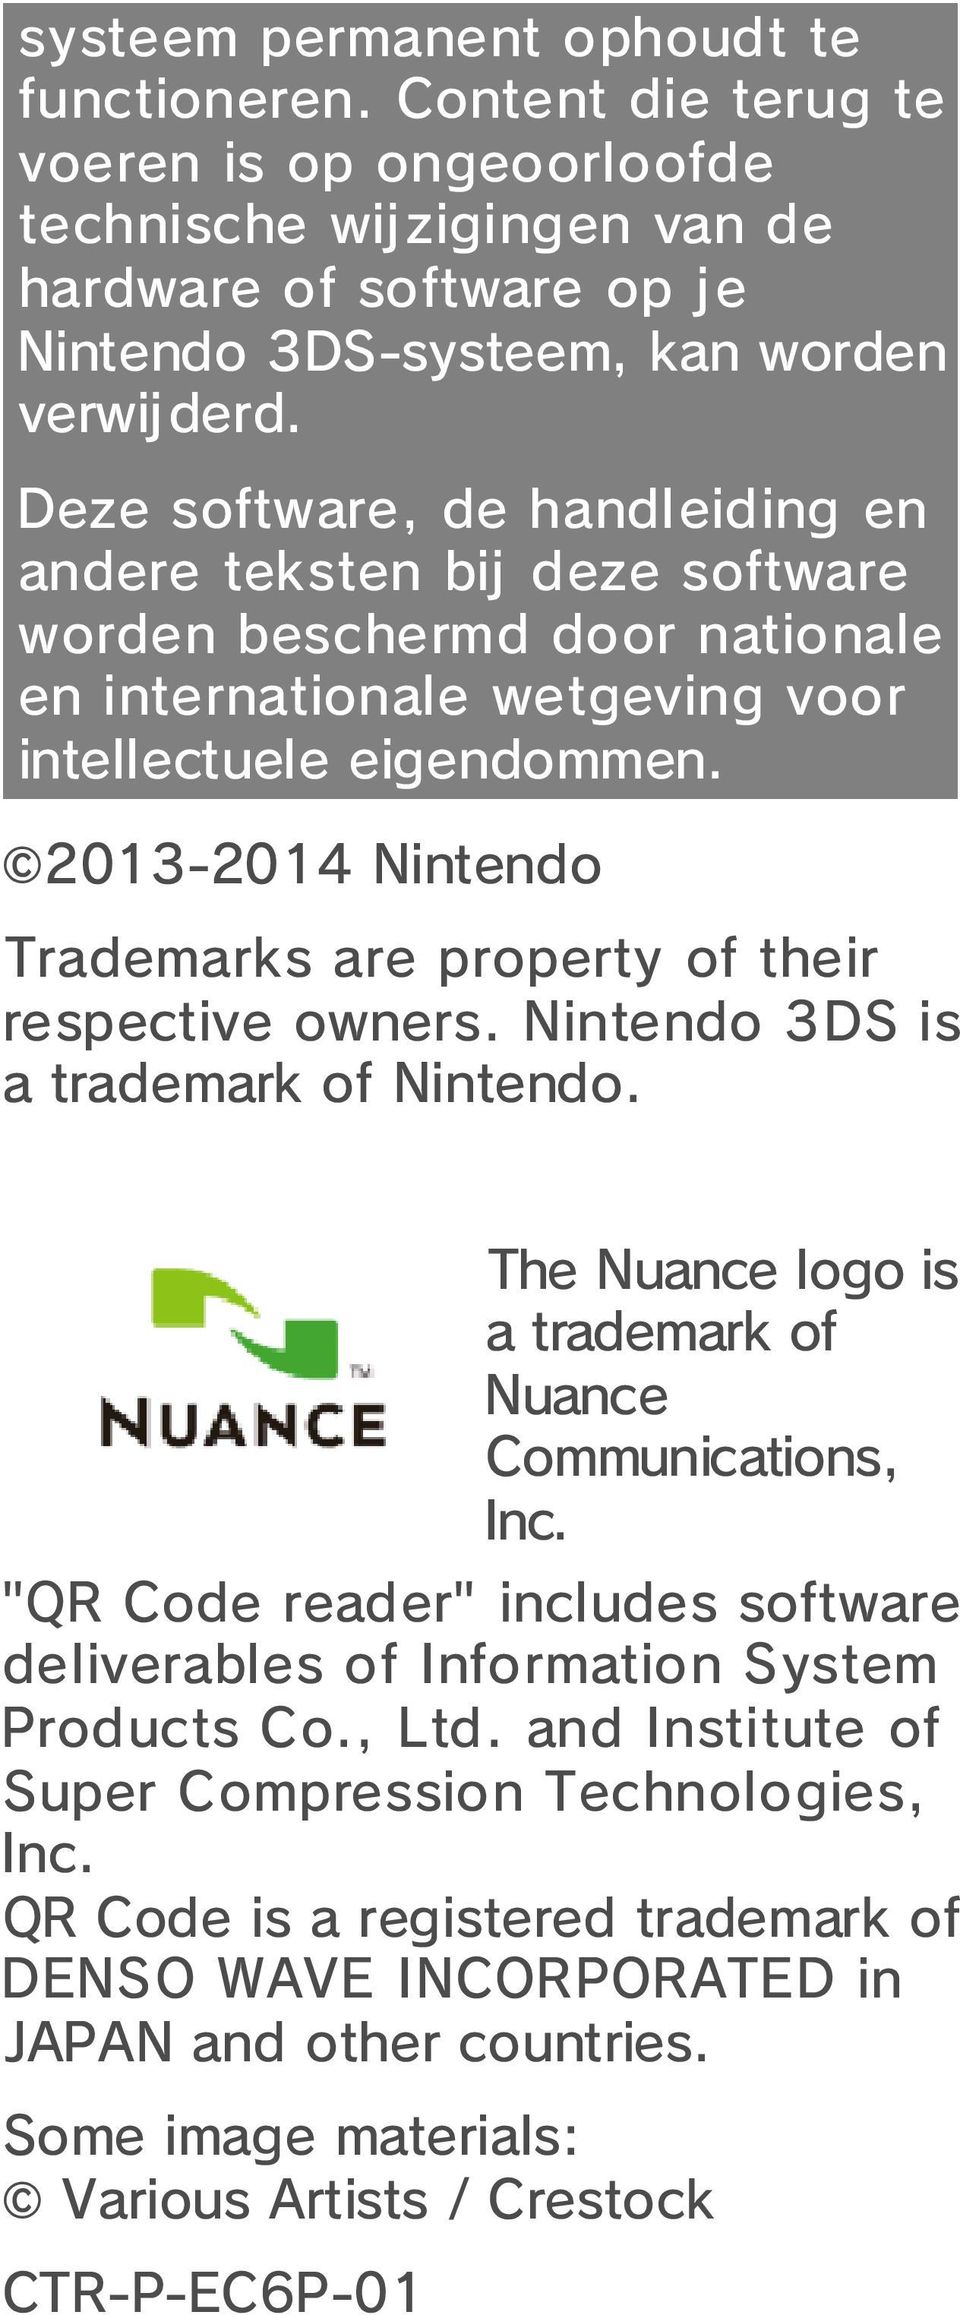 2013-2014 Nintendo Trademarks are property of their respective owners. Nintendo 3DS is a trademark of Nintendo. The Nuance logo is a trademark of Nuance Communications, Inc.